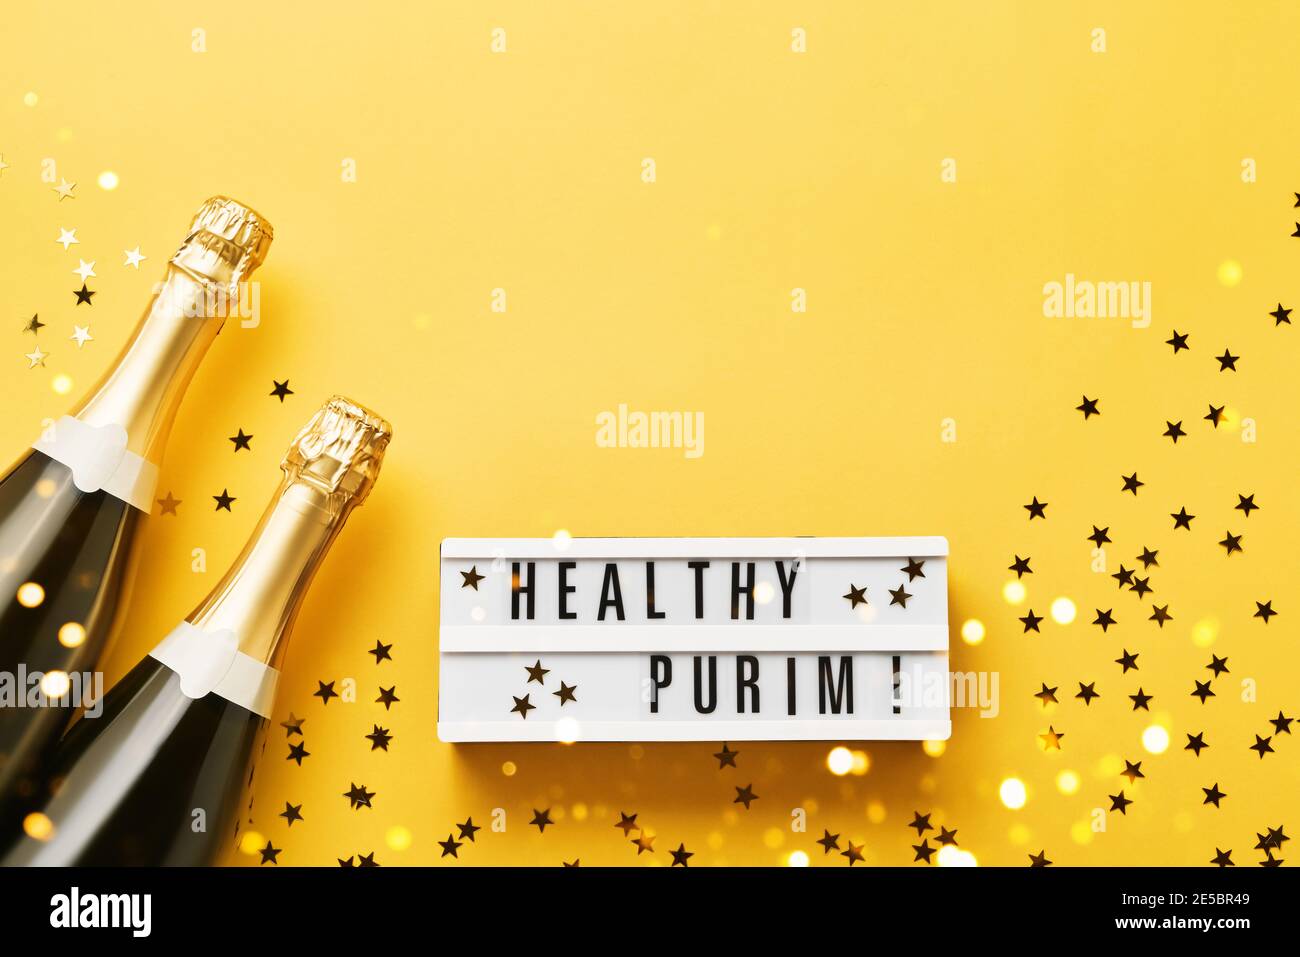 Healthy Purim written in lightbox and two champagne bottles on a yellow background. Flat lay of Purim Carnival Stock Photo